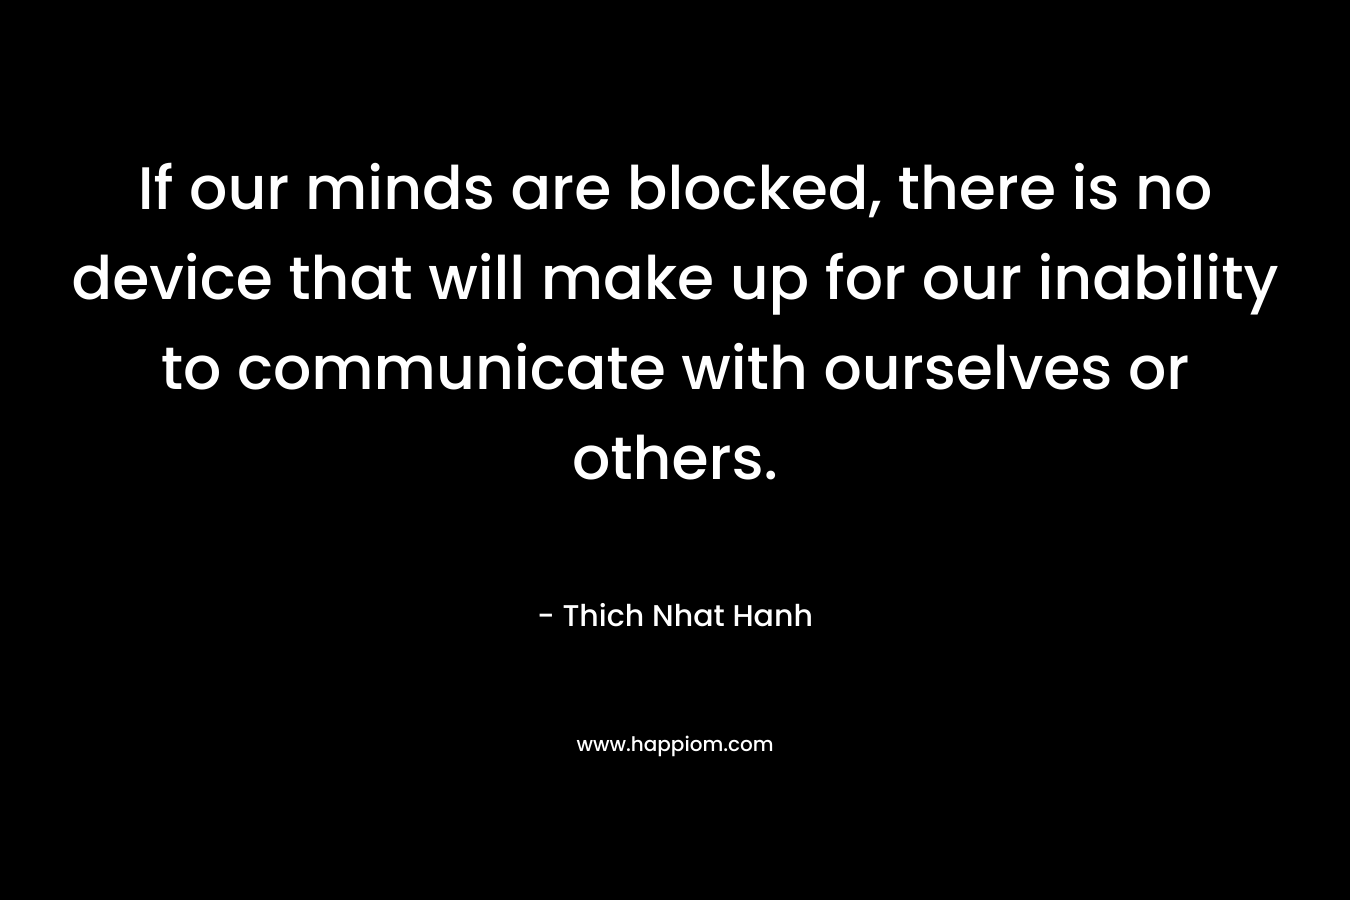 If our minds are blocked, there is no device that will make up for our inability to communicate with ourselves or others. – Thich Nhat Hanh